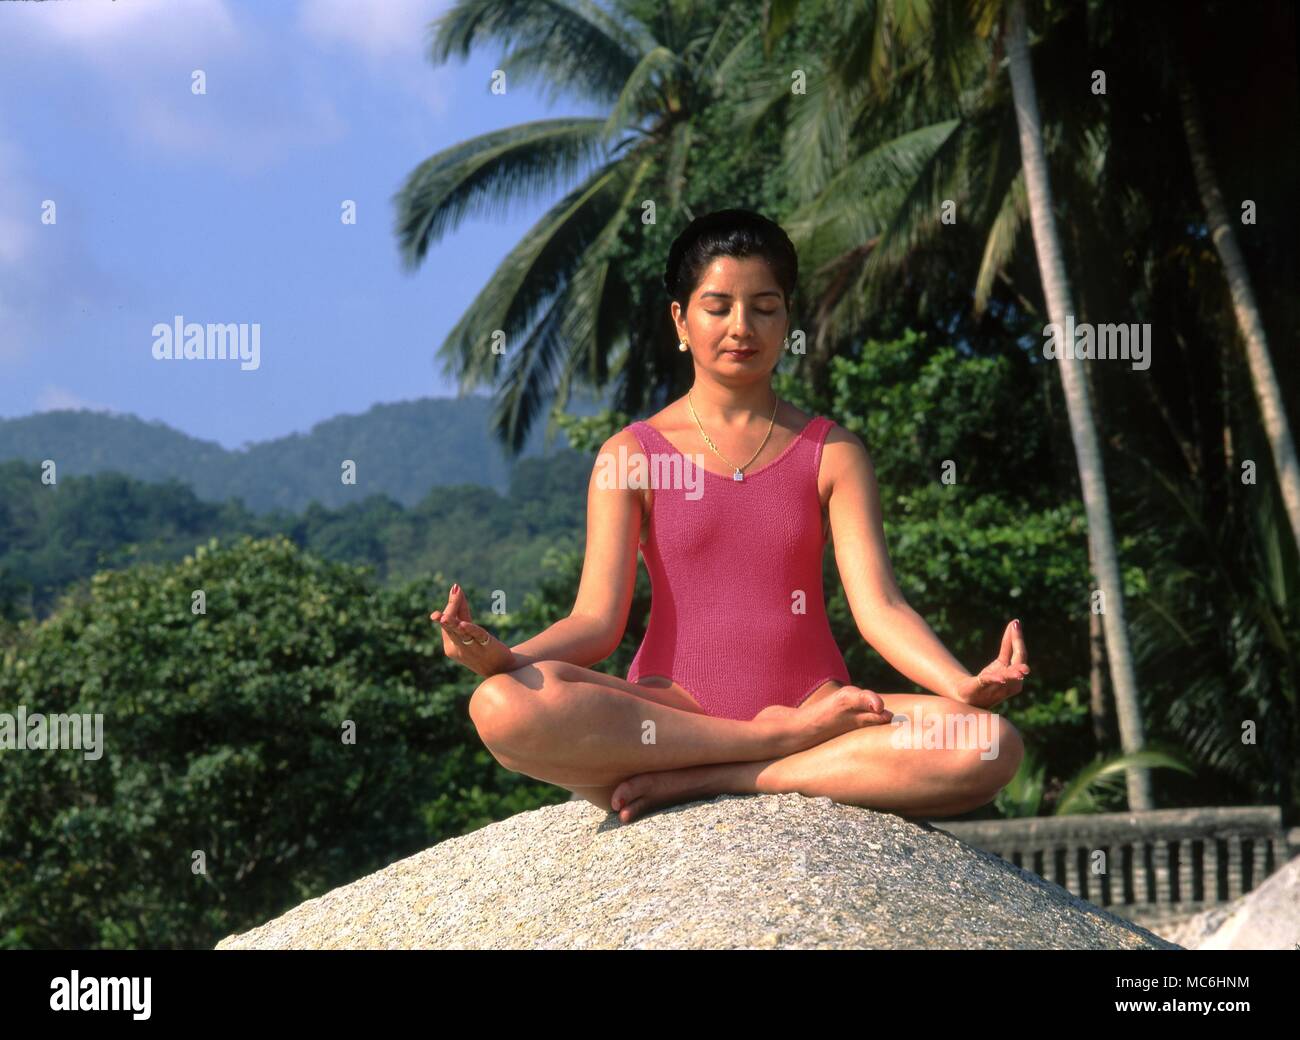 Indian lady meditating on a rock beneath a palm tree. Stock Photo